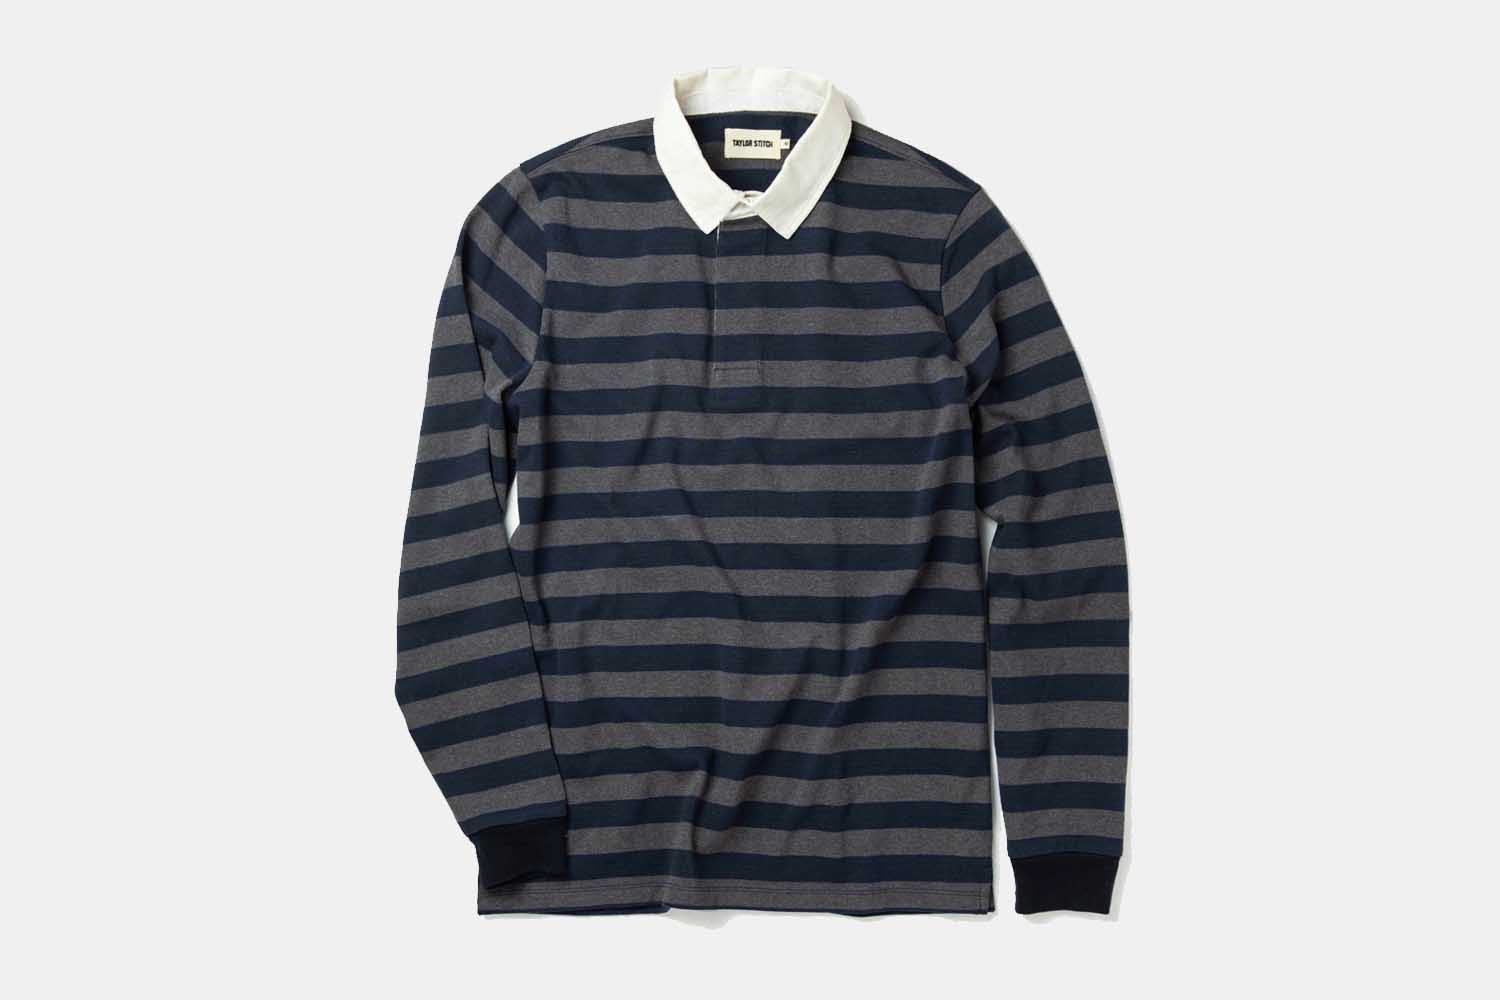 Deal: Taylor Stitch’s Rugged Navy Stripe Rugby Shirt Is on Sale